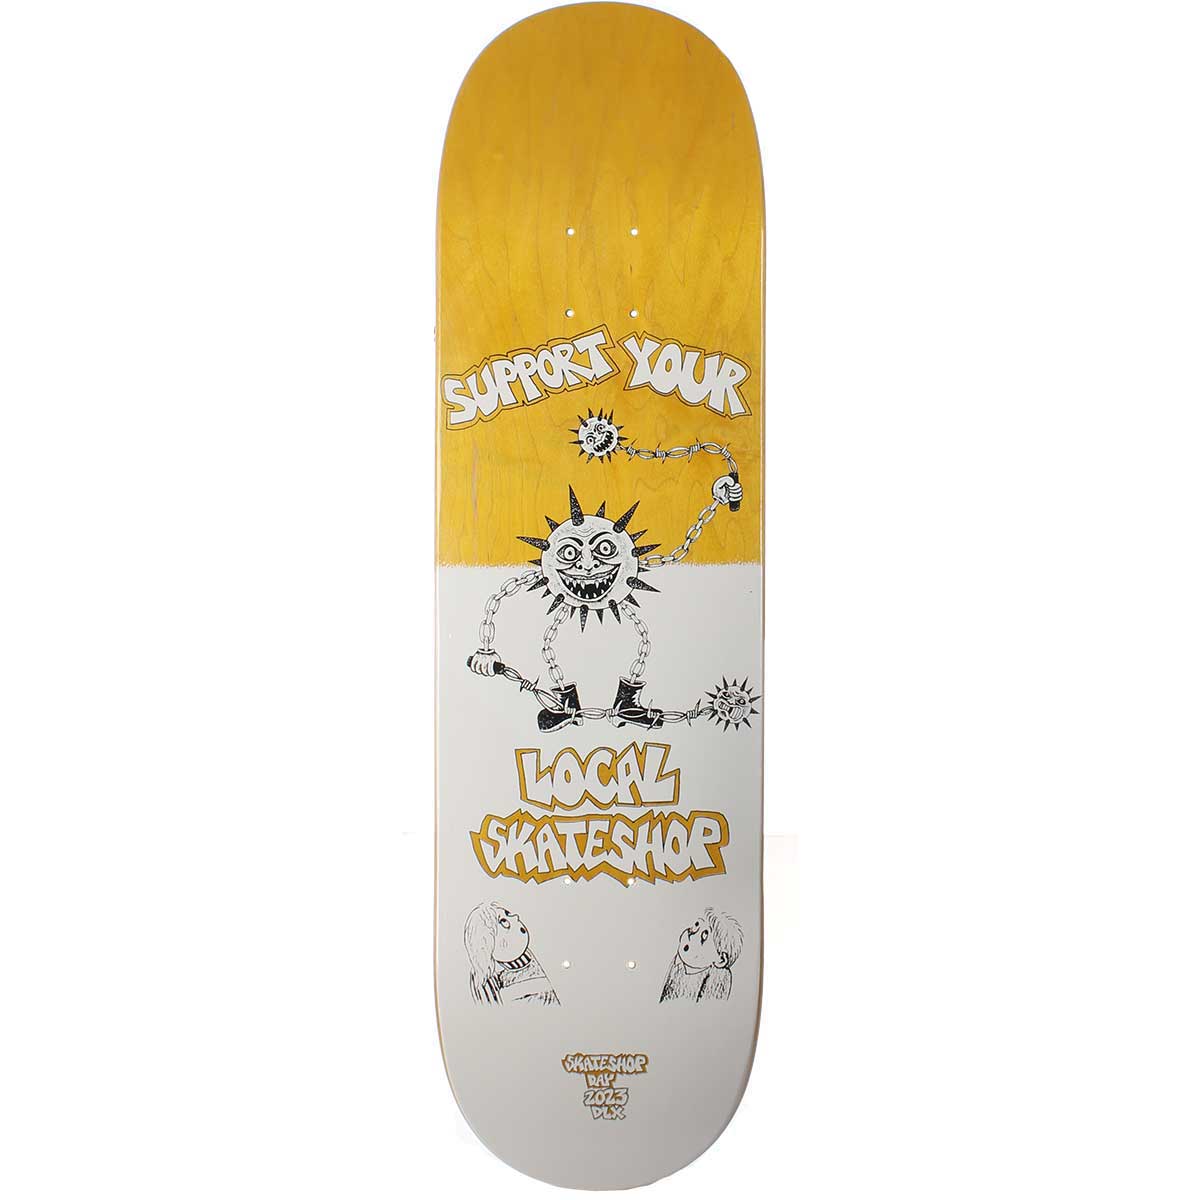 Deluxe Support Local Skateshop Skateboard Deck - Yellow Stain 8.5x31.8 SoCal Skateshop